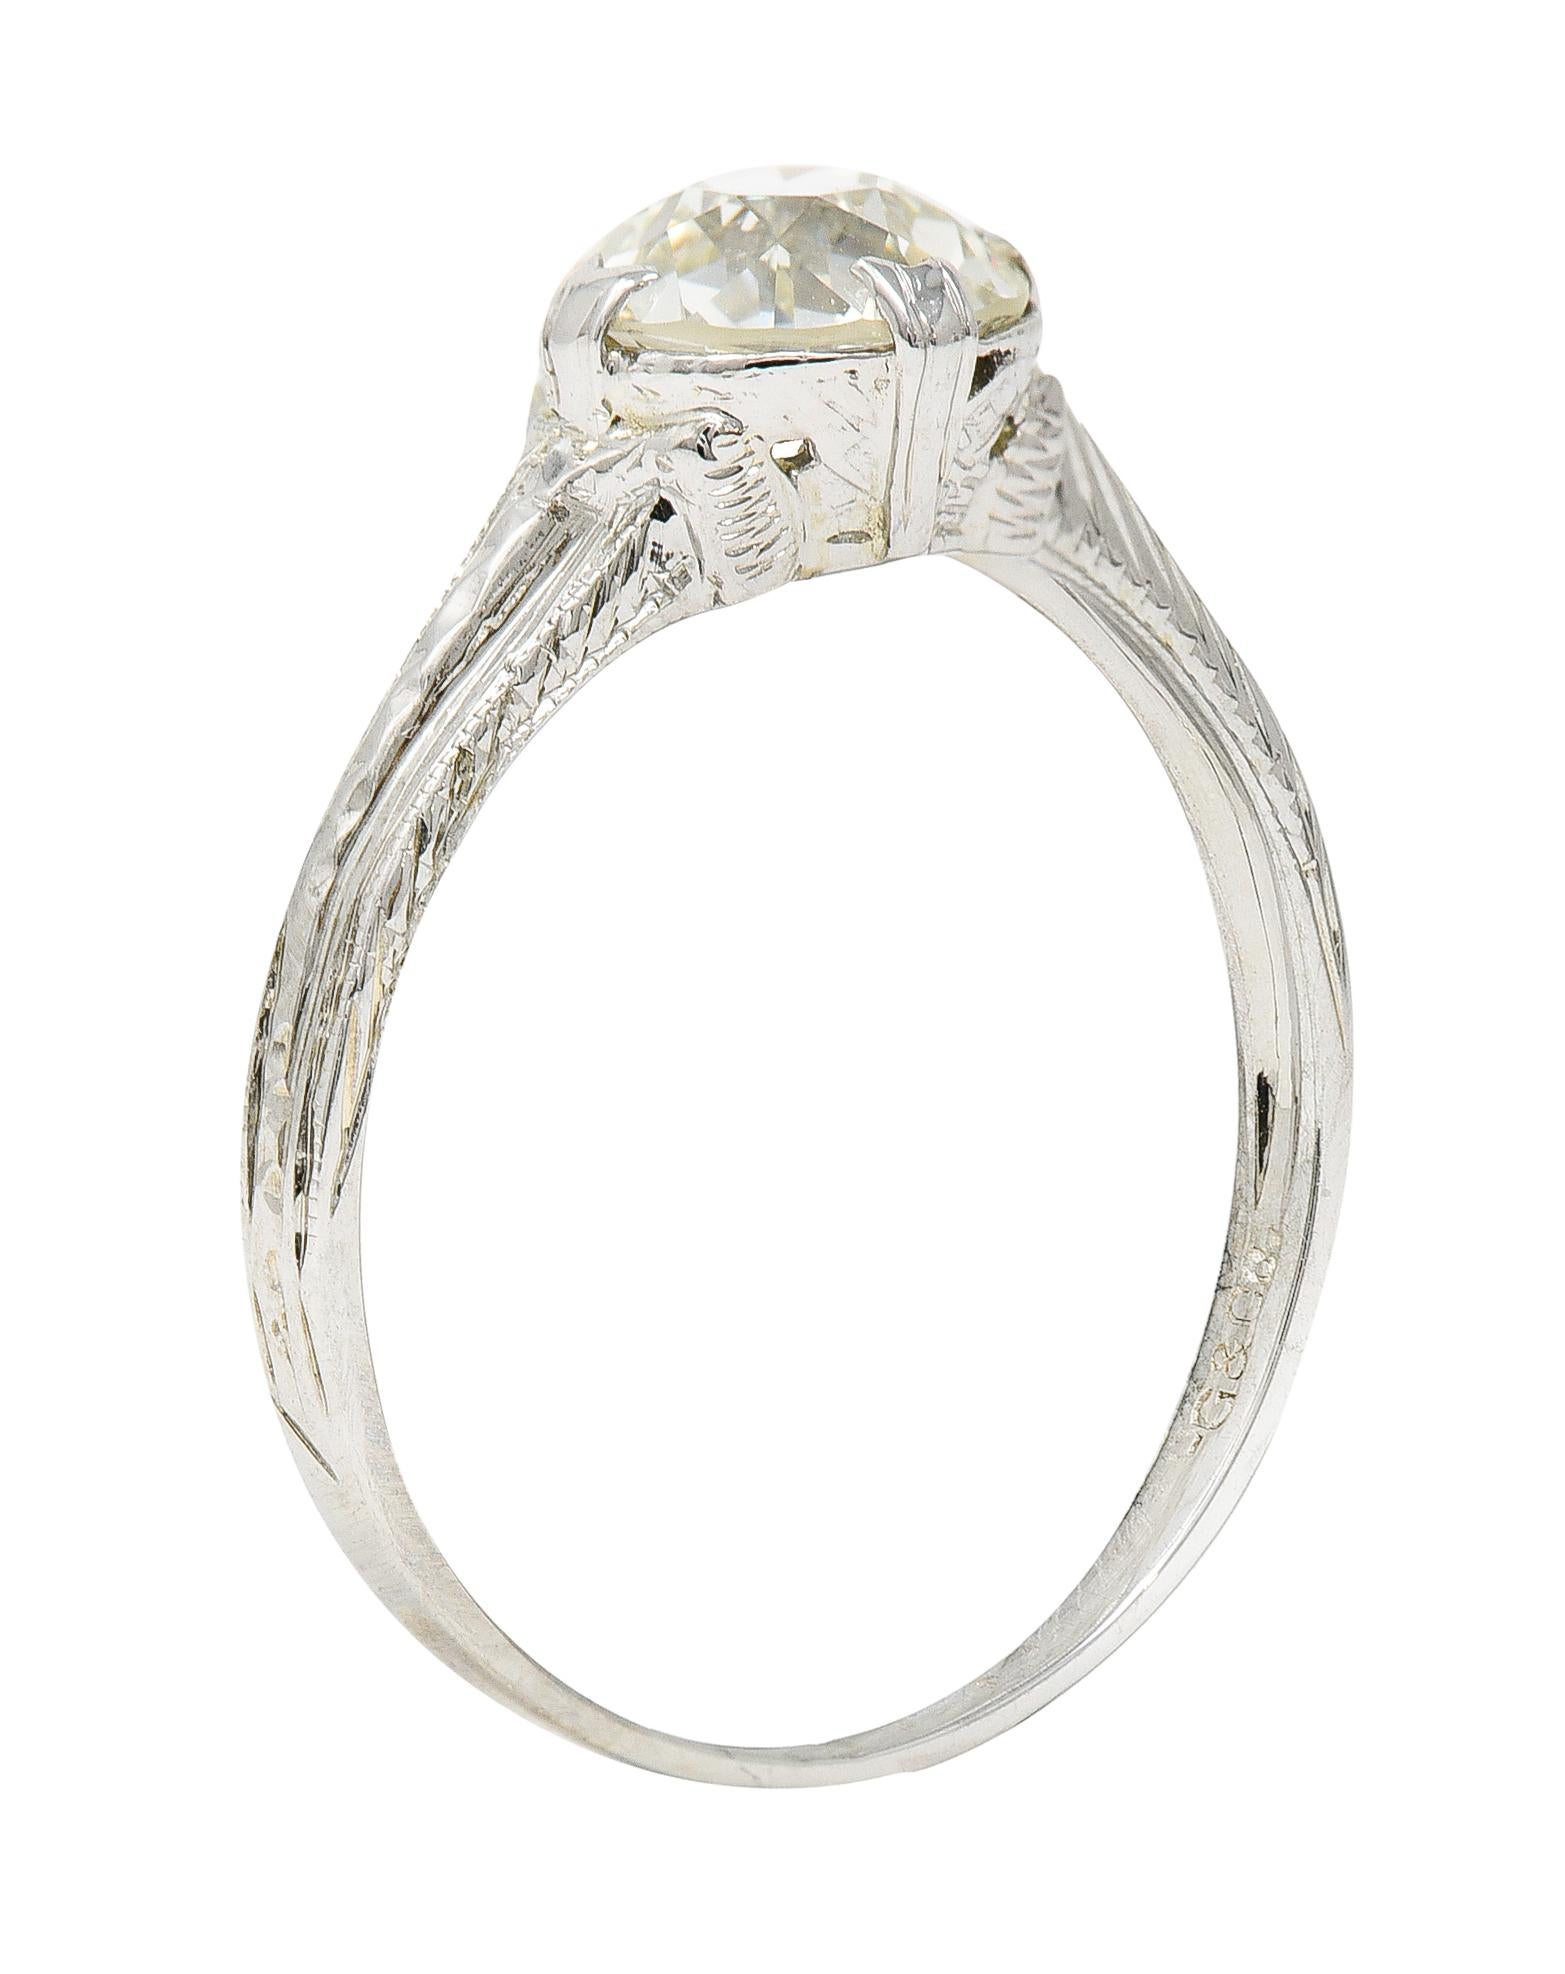 Featuring an old European cut diamond weighing approximately 1.60 carats - J color with SI2 clarity. Set by wide split prongs and resting in an intricately engraved head. Completed by engraved and faceted shoulders. Stamped 18K for 18 karat gold.